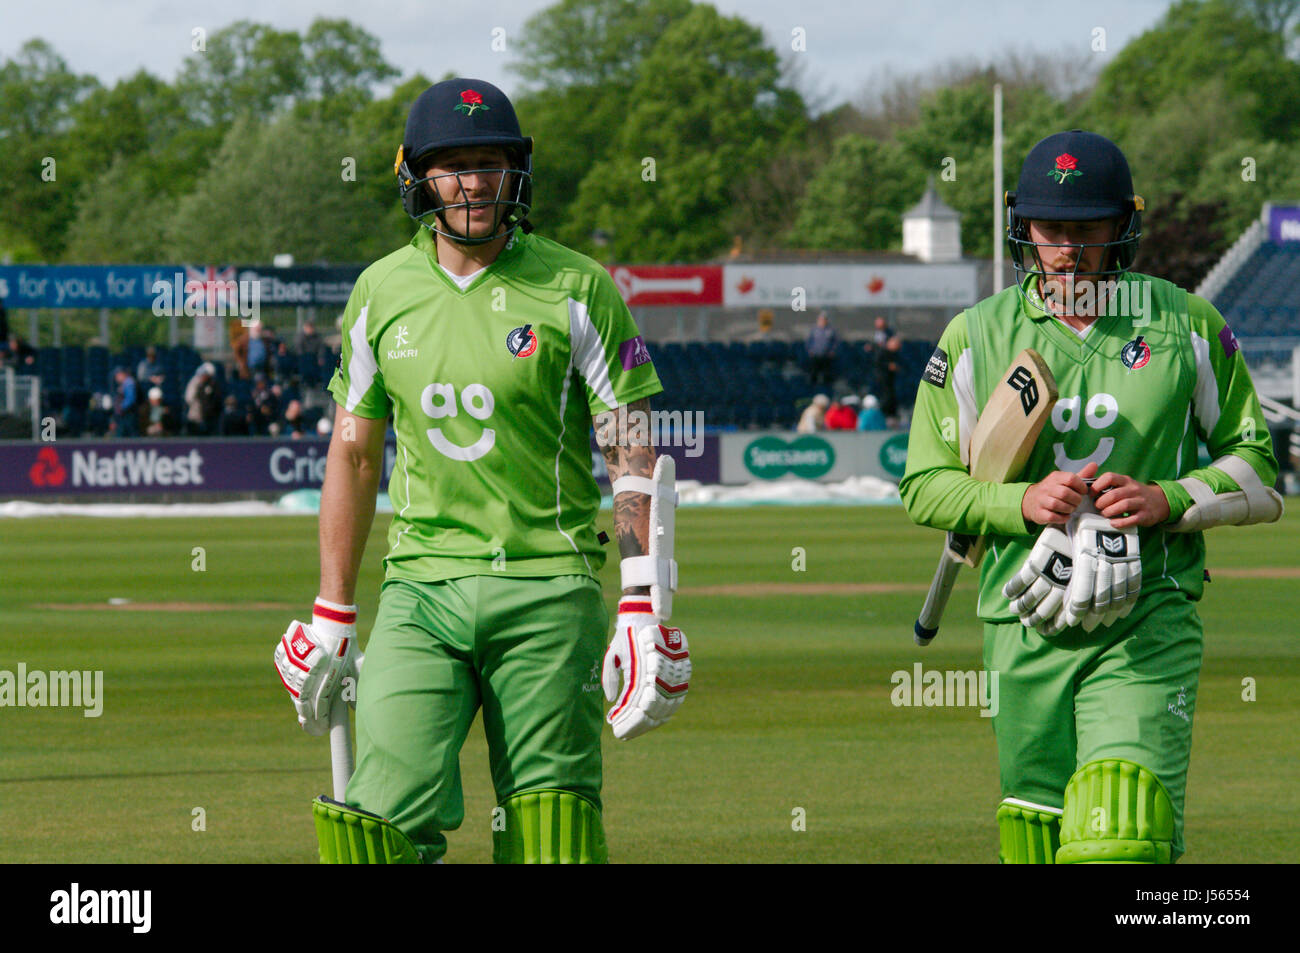 Chester le Street, England, 16 May 2017. Kyle Jarvis, left, and Danny Lamb, not out batsmen for Lancashire, leaving the field at the end of their innings against Durham in the Royal London One Day match at Emirates Riverside. Credit: Colin Edwards/Alamy Live News. Stock Photo